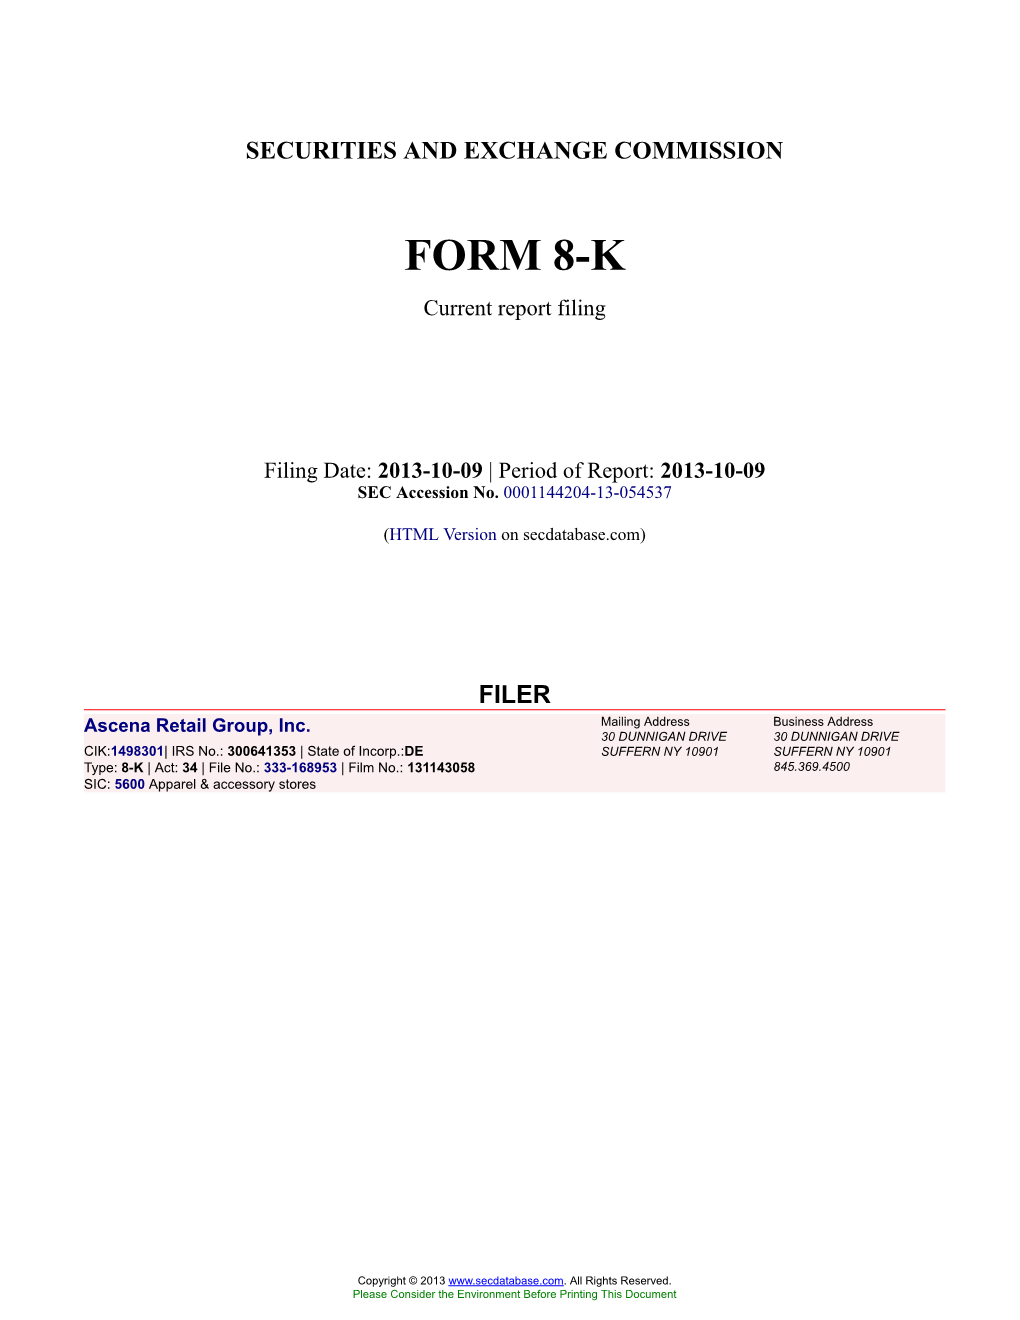 Ascena Retail Group, Inc. Form 8-K Current Report Filed 2013-10-09